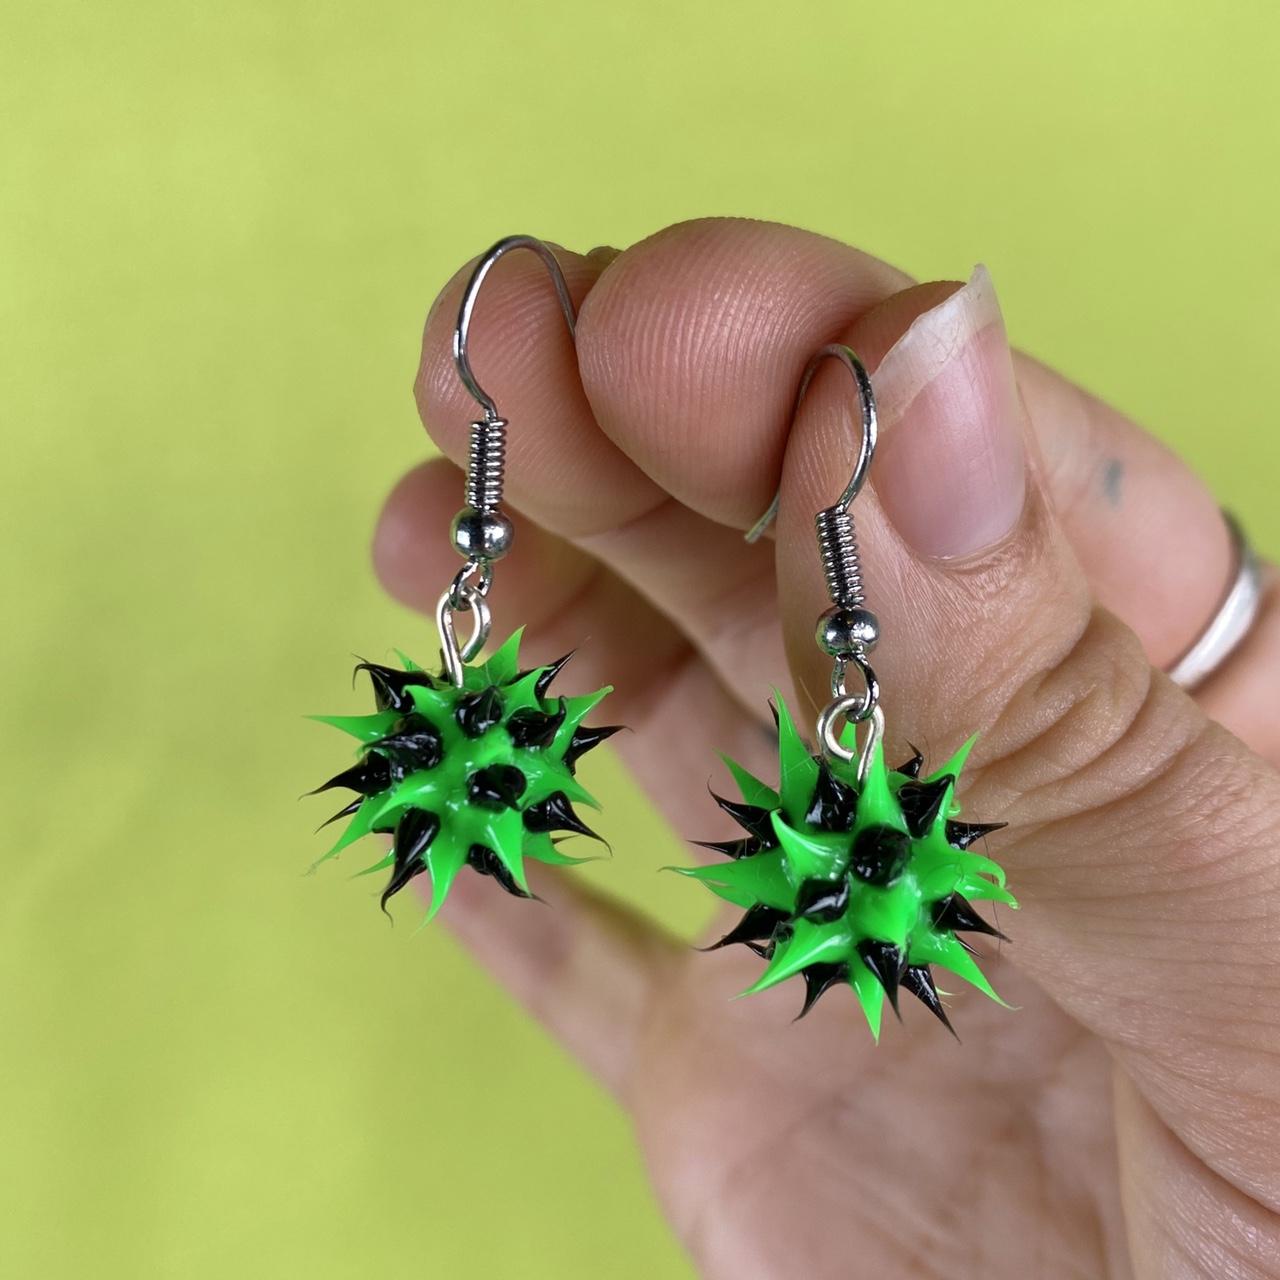 Do y'all remember these spiky silicone earrings everyone had in